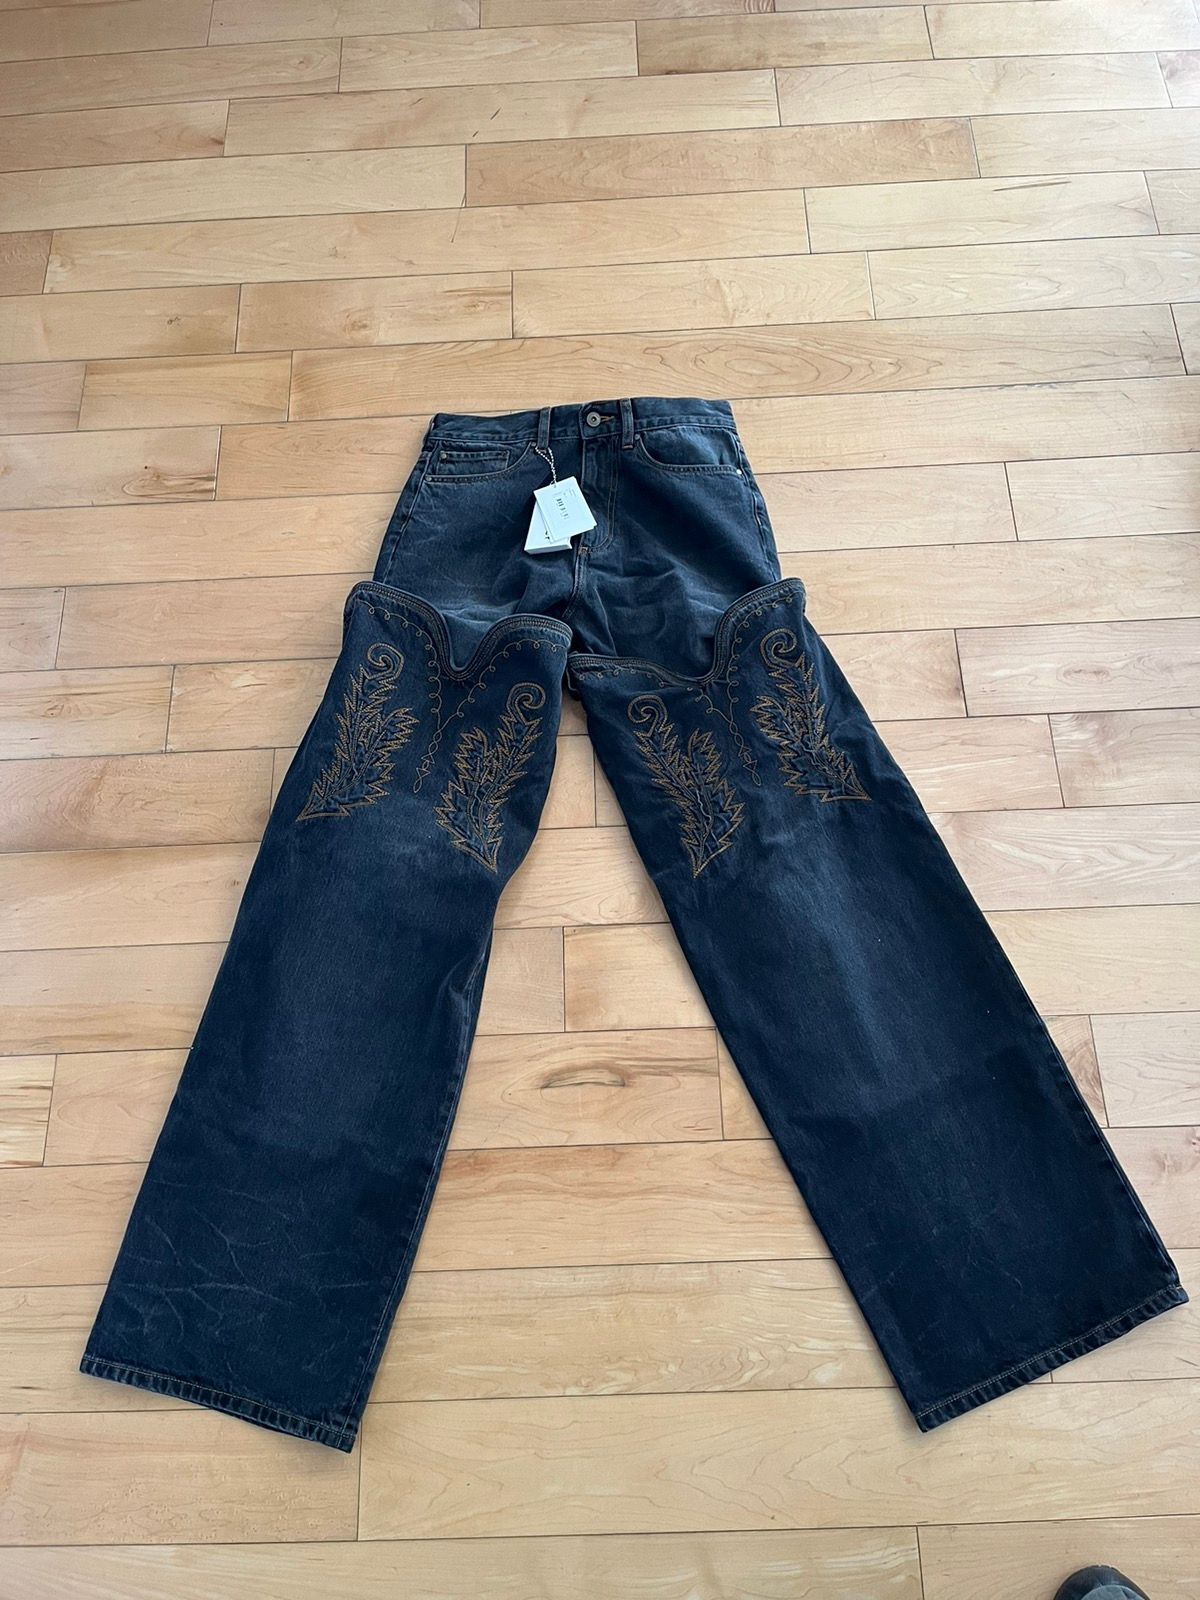 NWT - Y/PROJECT High Cowboy Jeans - 1